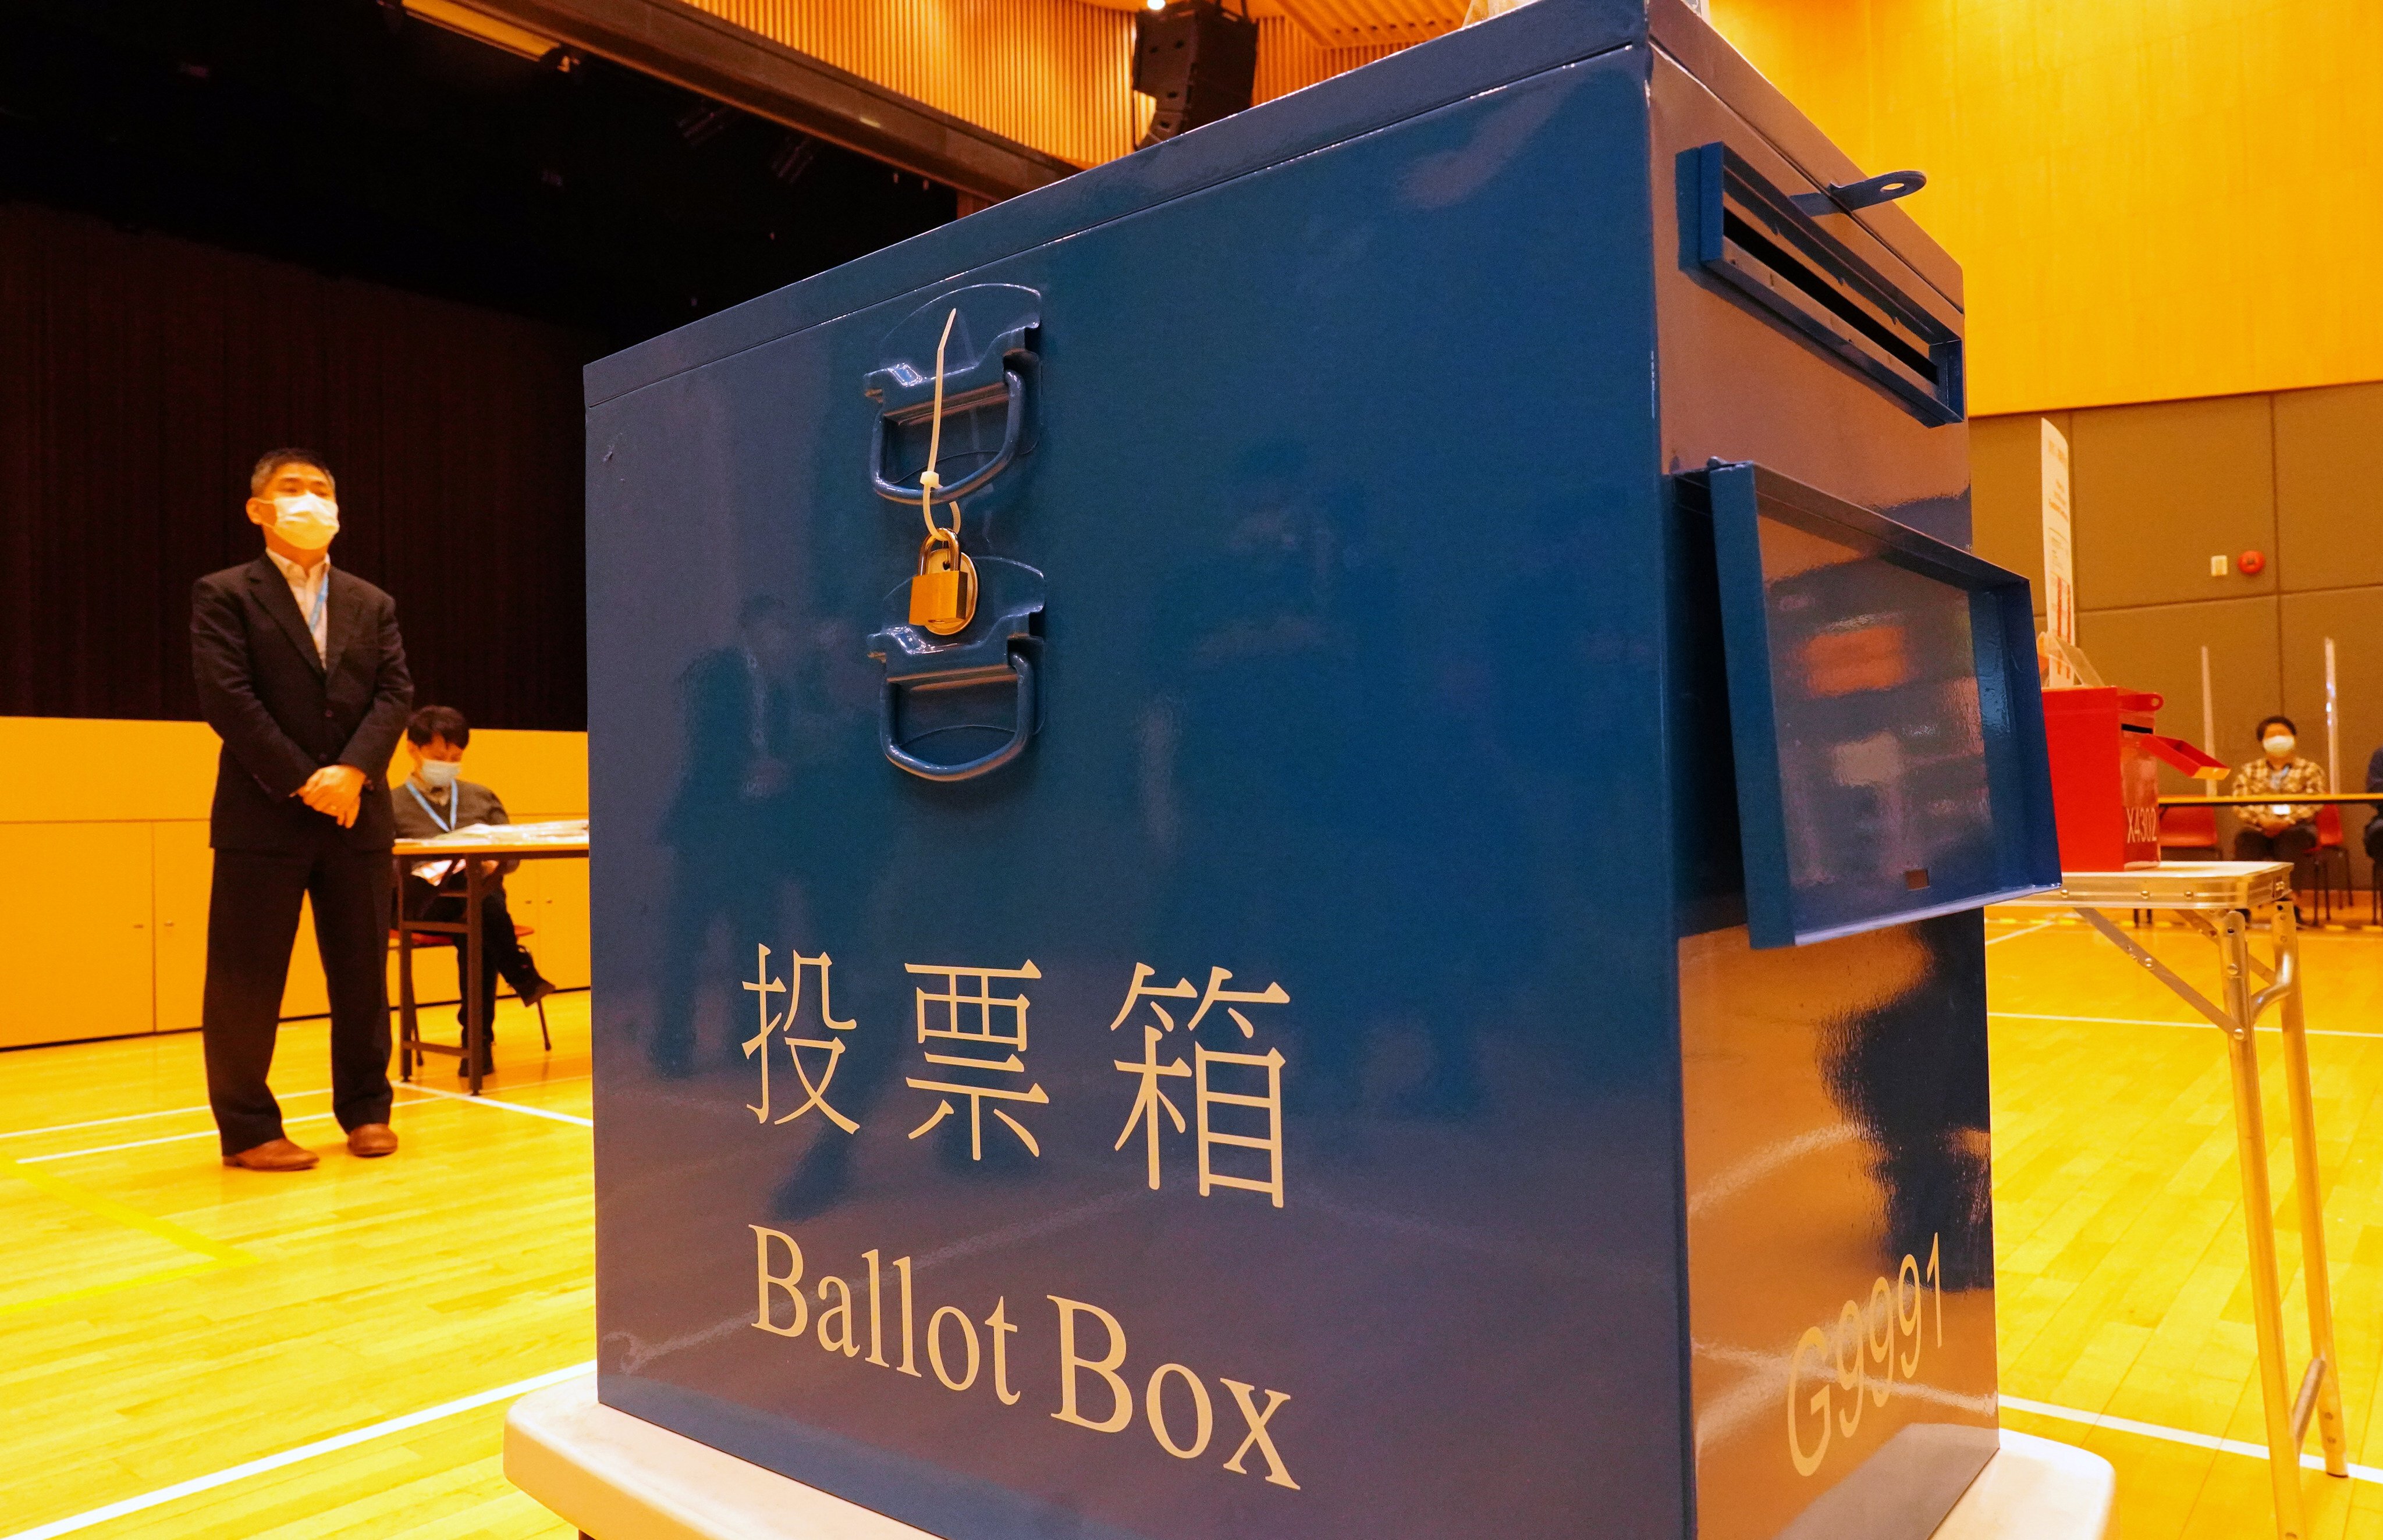 A data leak at Hong Kong’s electoral office has exposed the personal details of 15,000 voters. Photo: Robert Ng